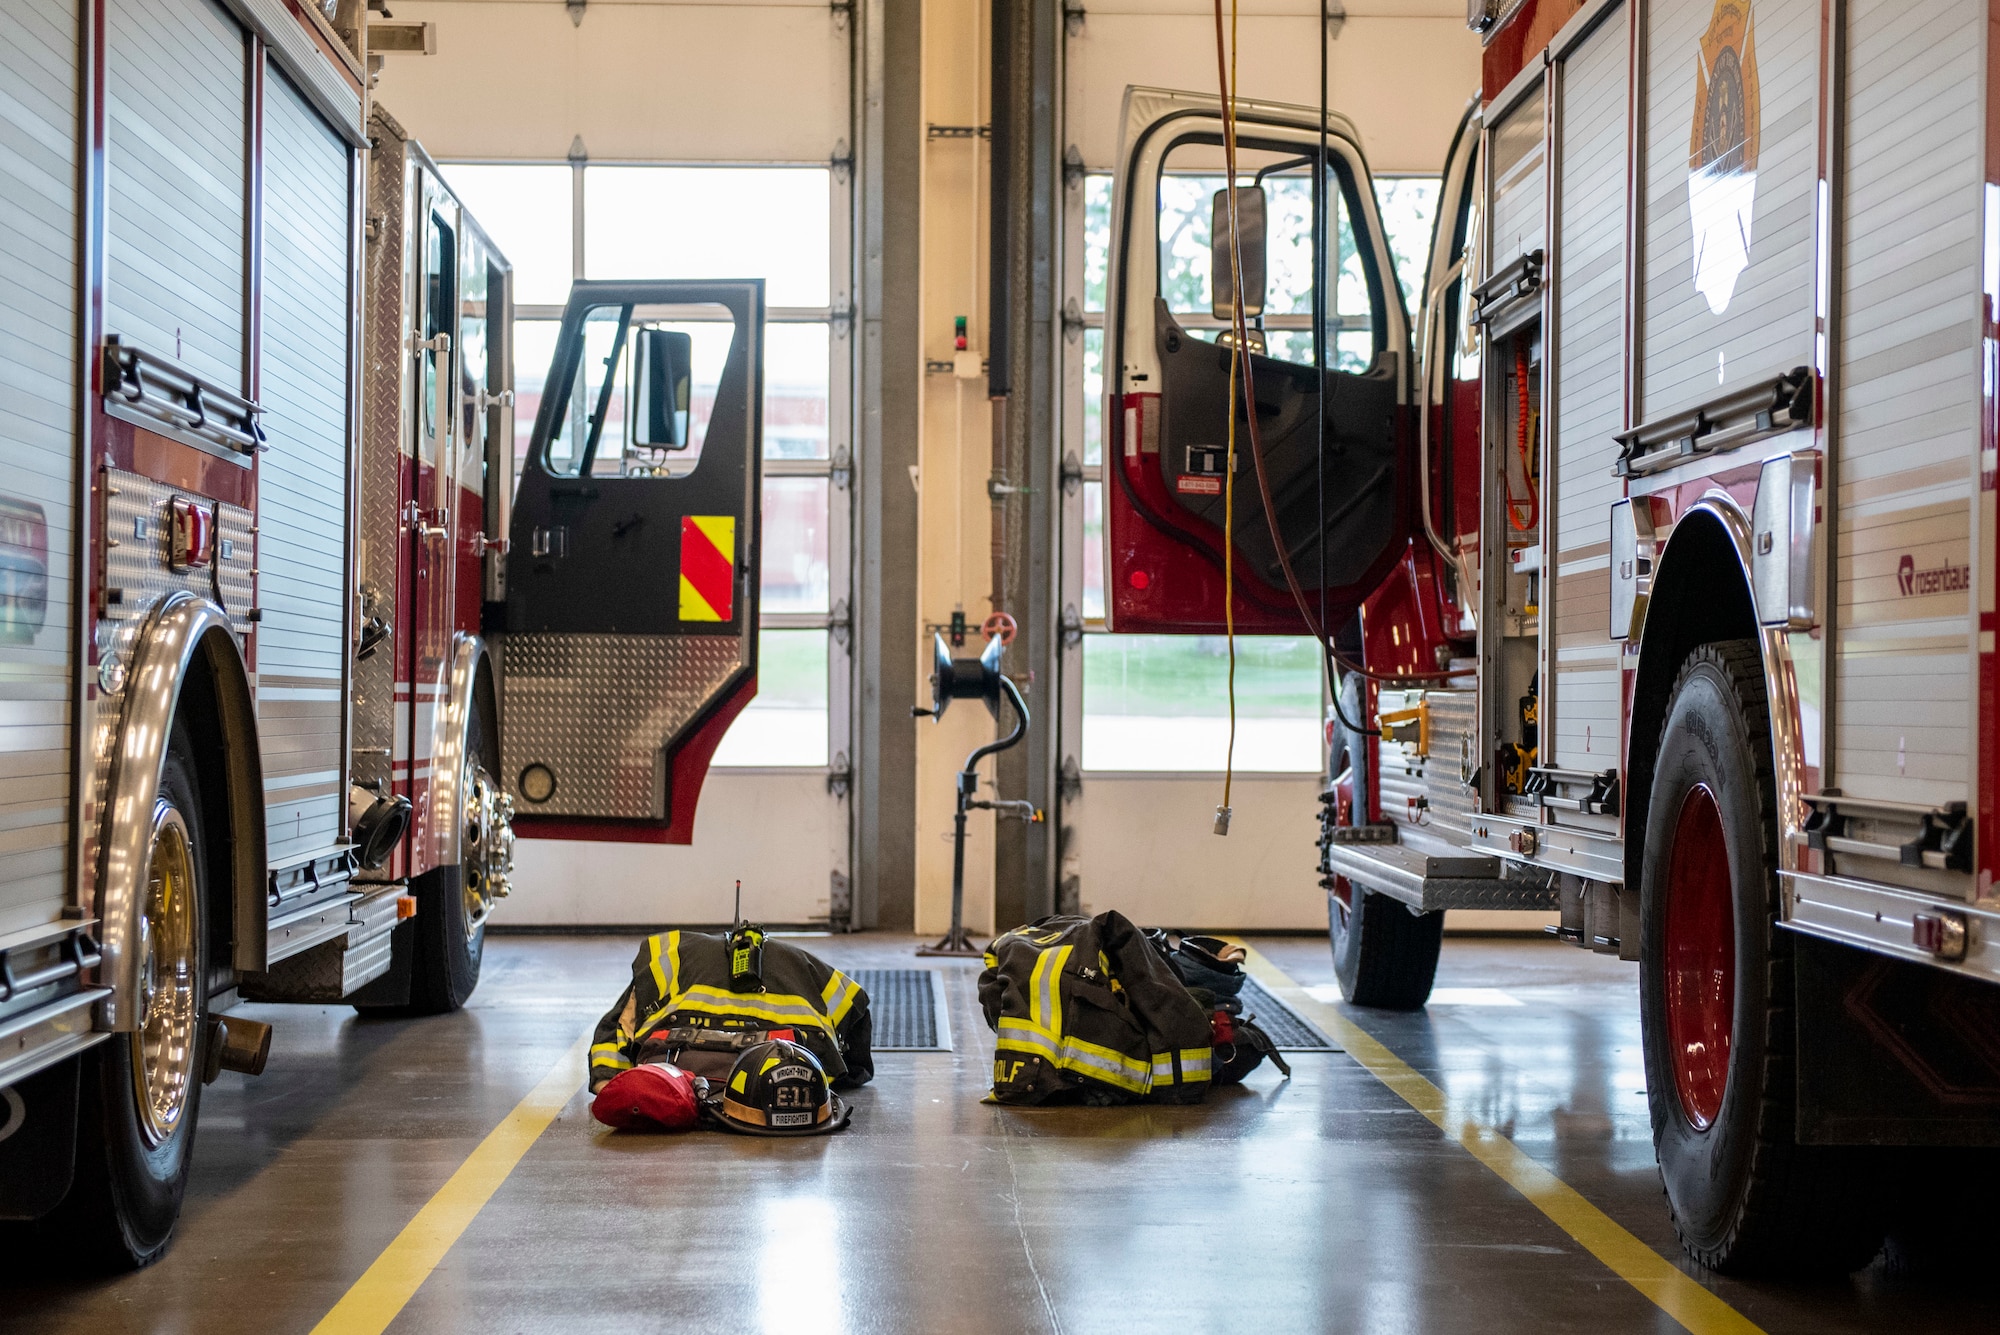 Bunker gear sits staged next to two fire trucks belonging to the 788th Civil Engineer Fire Department inside the bays at Station 1, June 23, 2021, at Wright-Patterson Air Force Base, Ohio. The fire department is on call 24/7 all year and capable of responding anywhere on base within 5 minutes when a call for help comes in. (U.S. Air Force photo by Wesley Farnsworth)